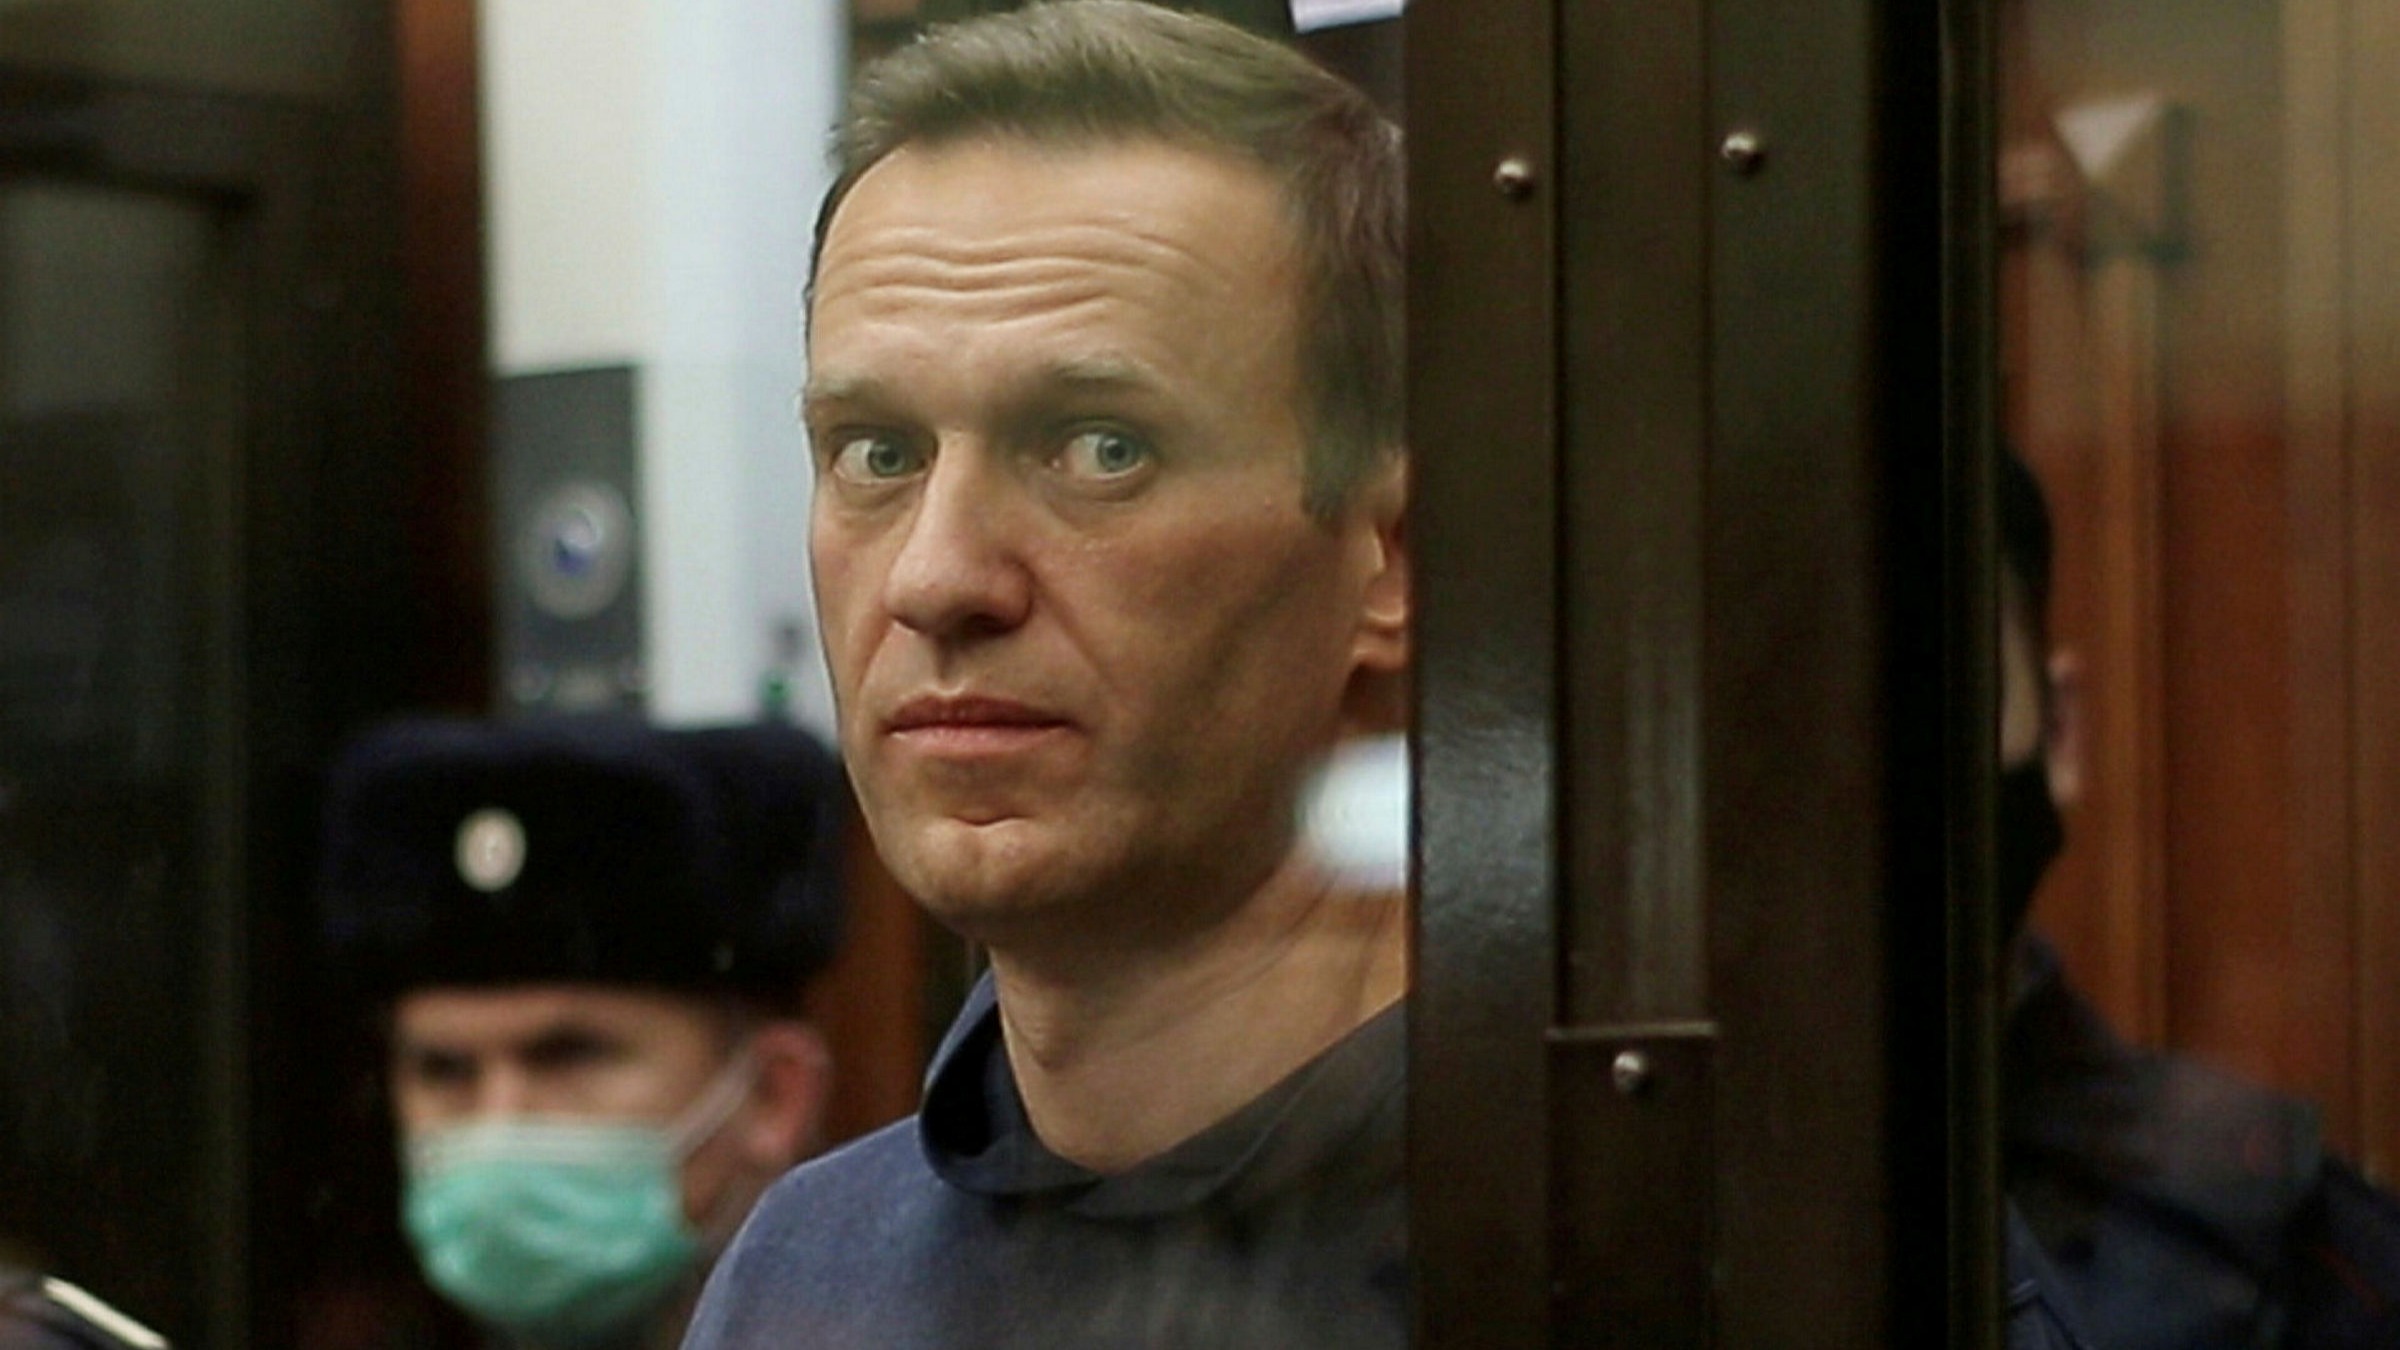 China Slams US/EU Over Interfering In Russia's Internal Affairs Over Alexey Navalny